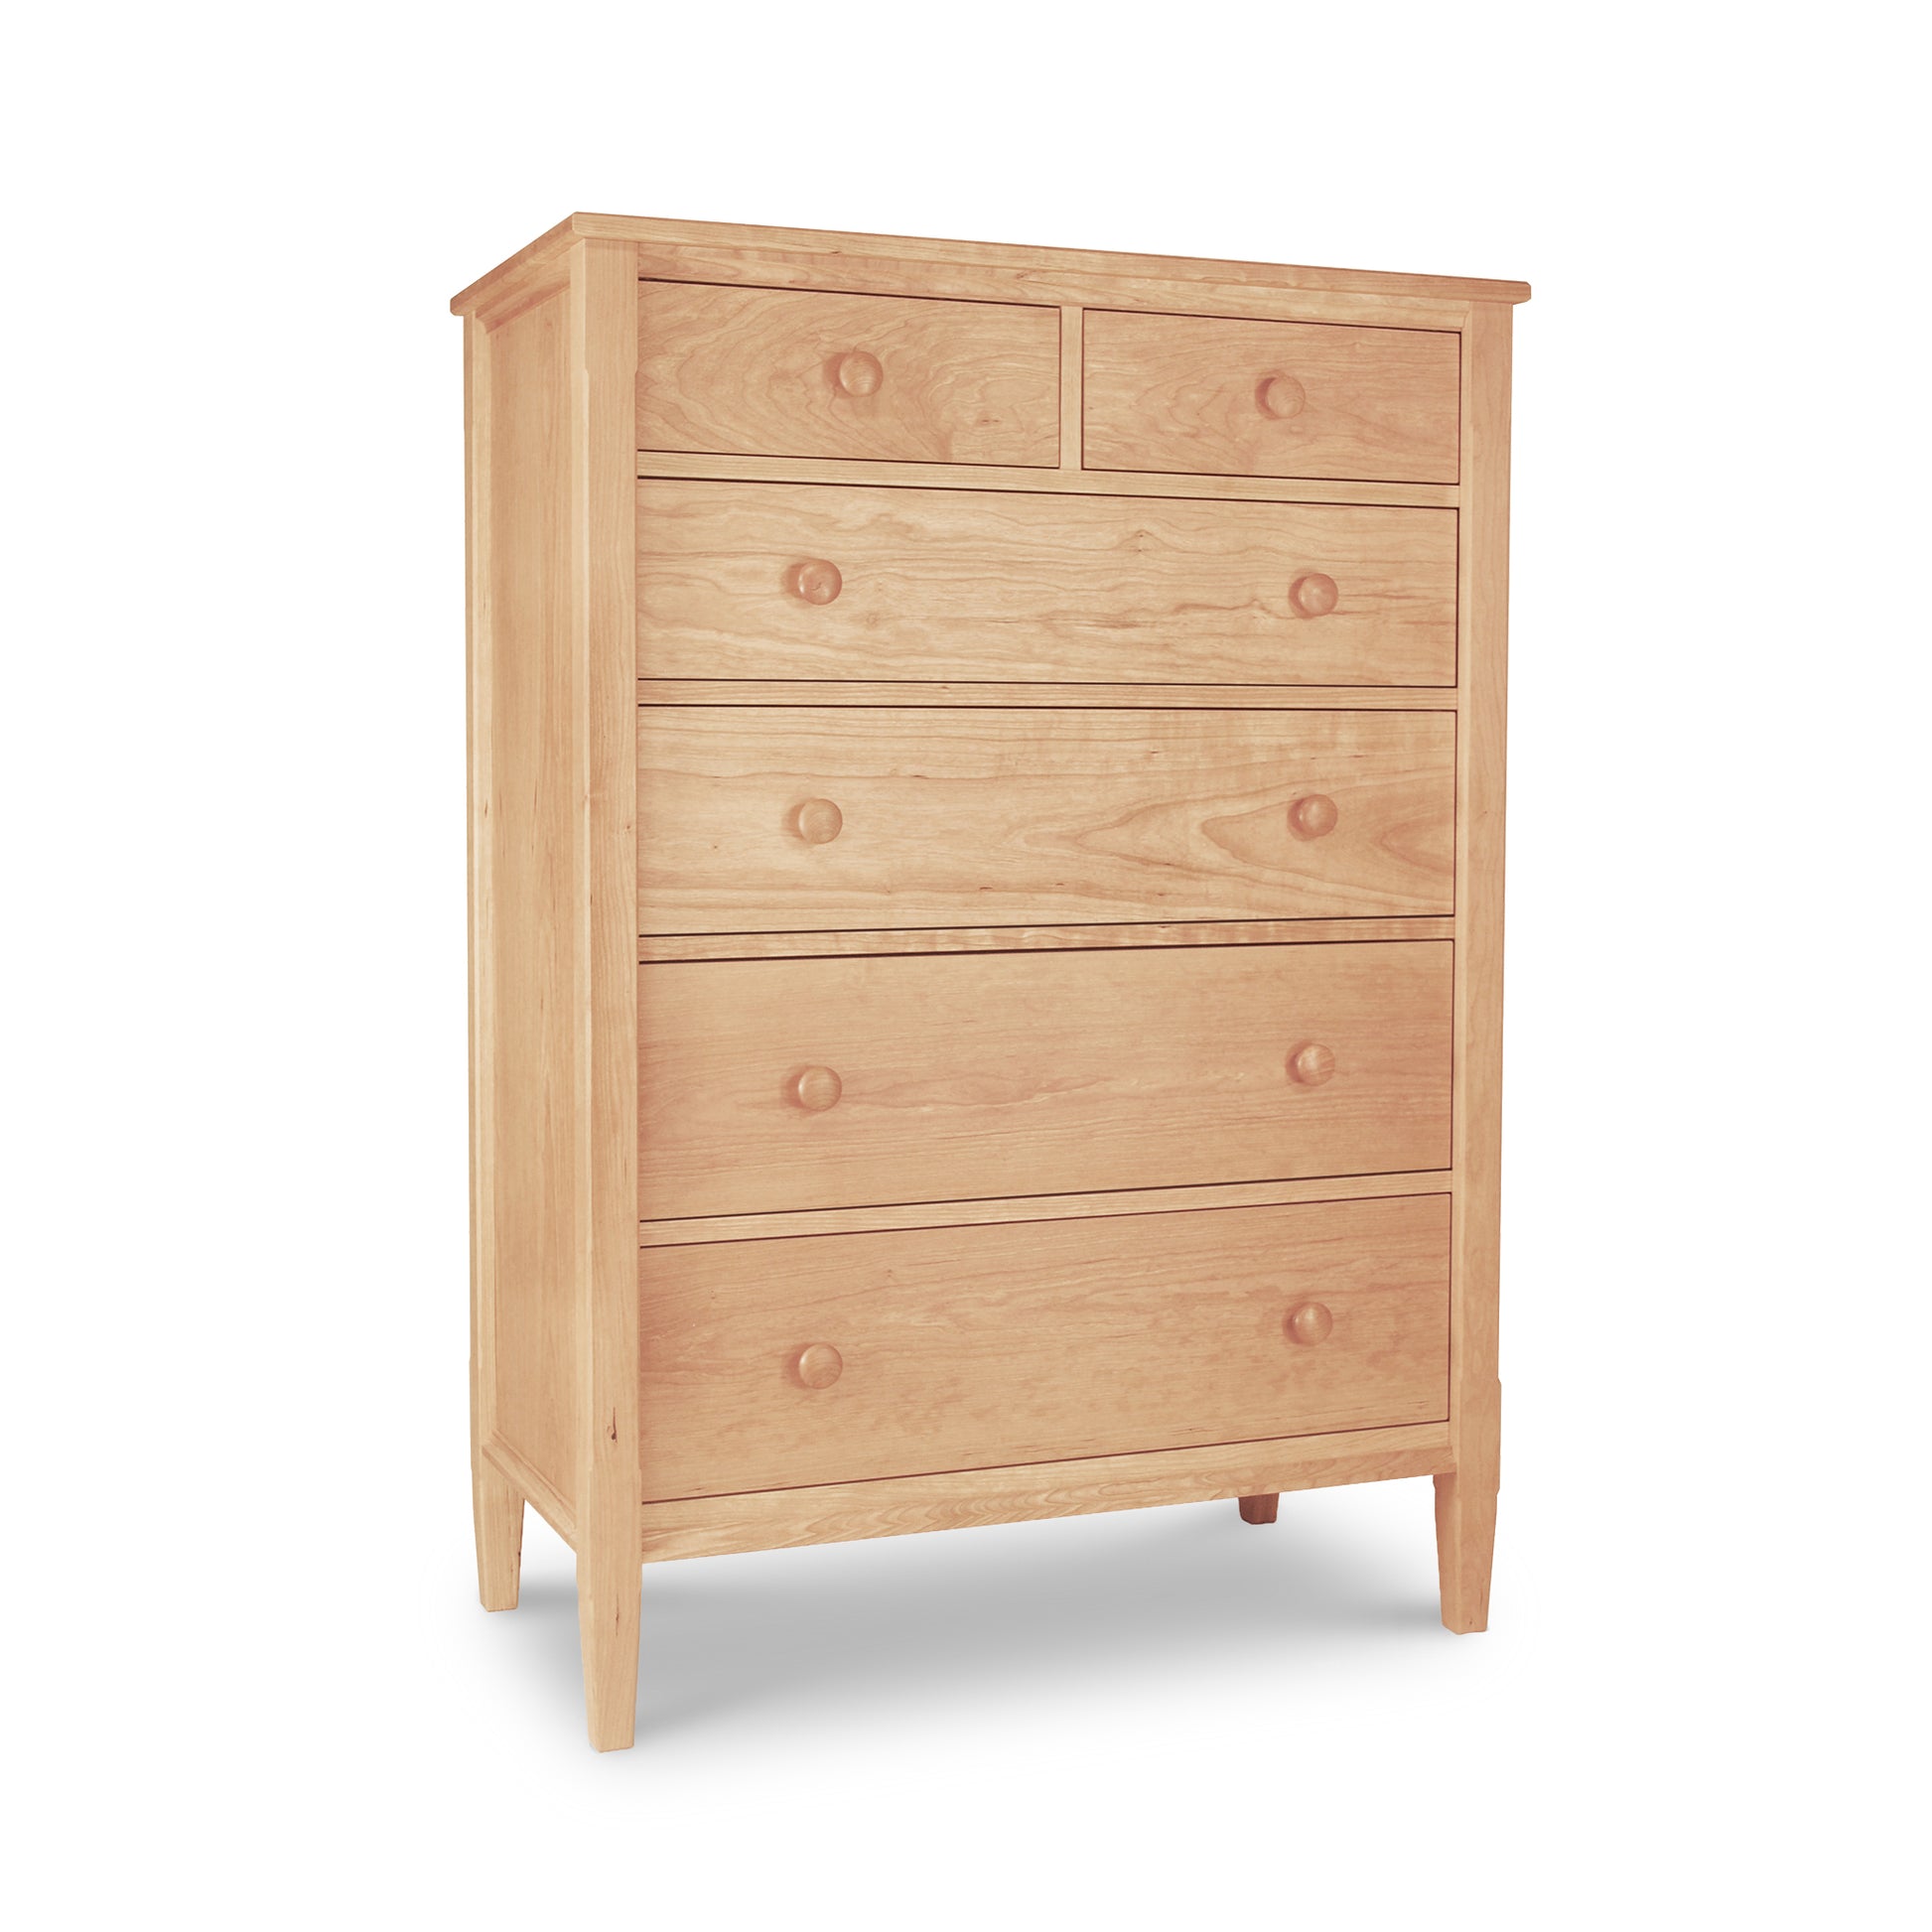 A Maple Corner Woodworks Vermont Shaker 6-Drawer Chest for bedroom storage on a white background.